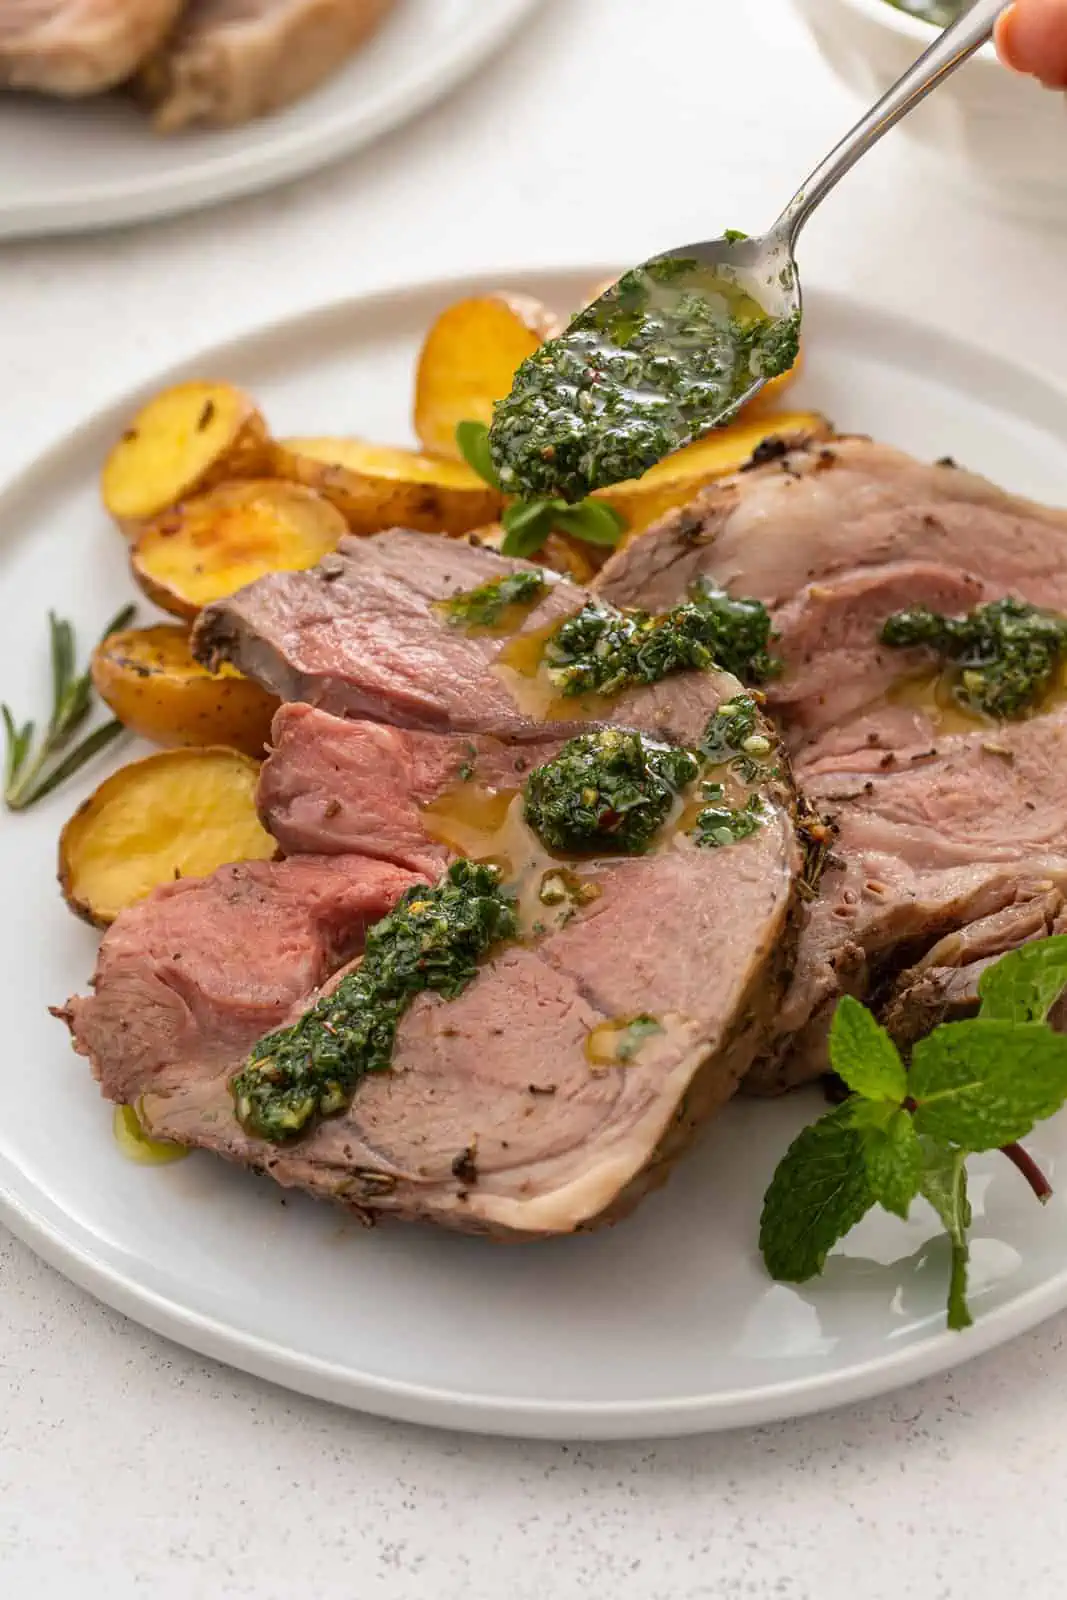 Mint chimichurri being spooned over slices of roasted boneless leg of lamb on a white plate.